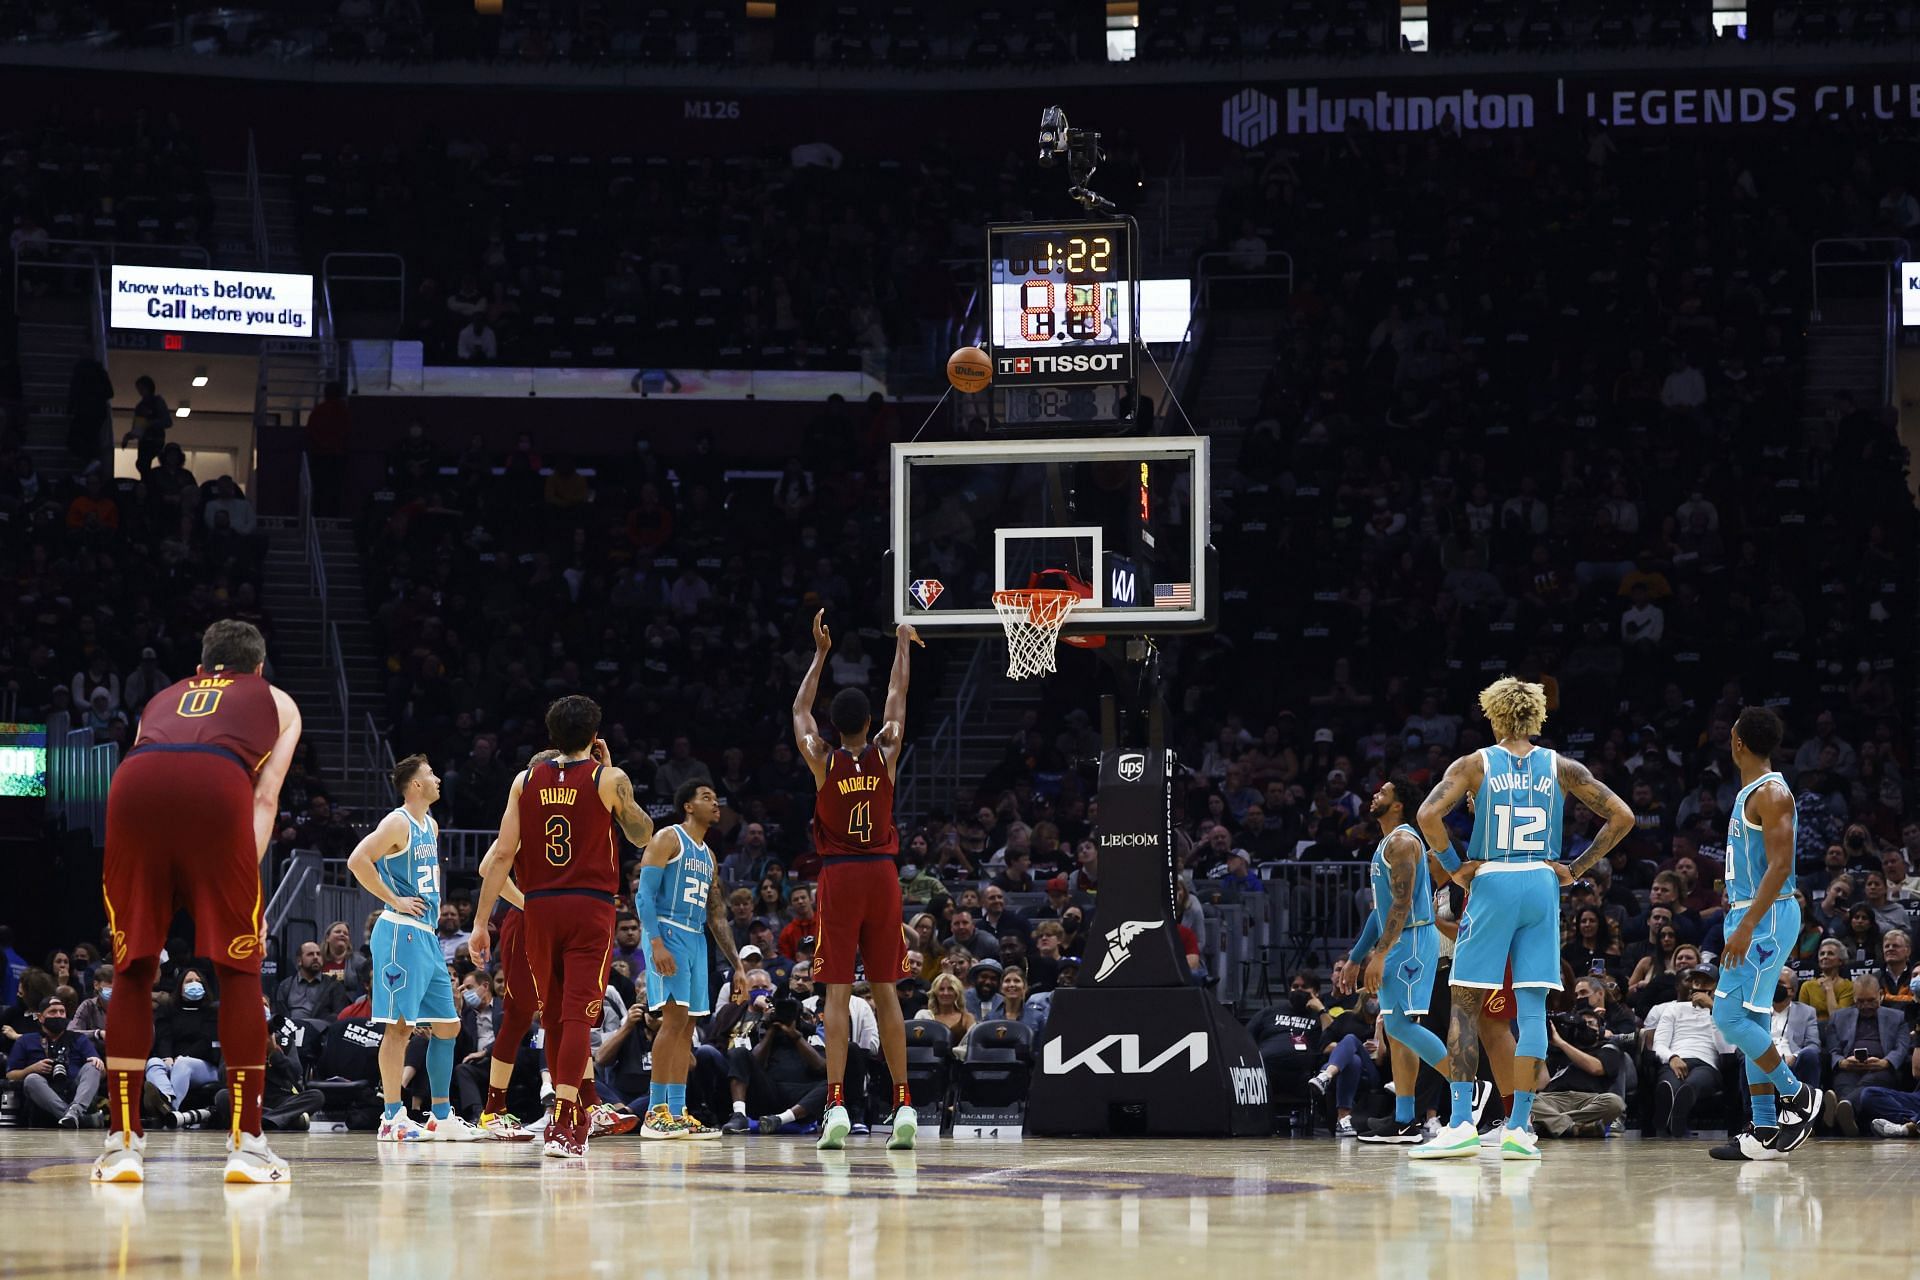 Cleveland Cavaliers forward Evan Mobley hitting a free throw against the Charlotte Hornets